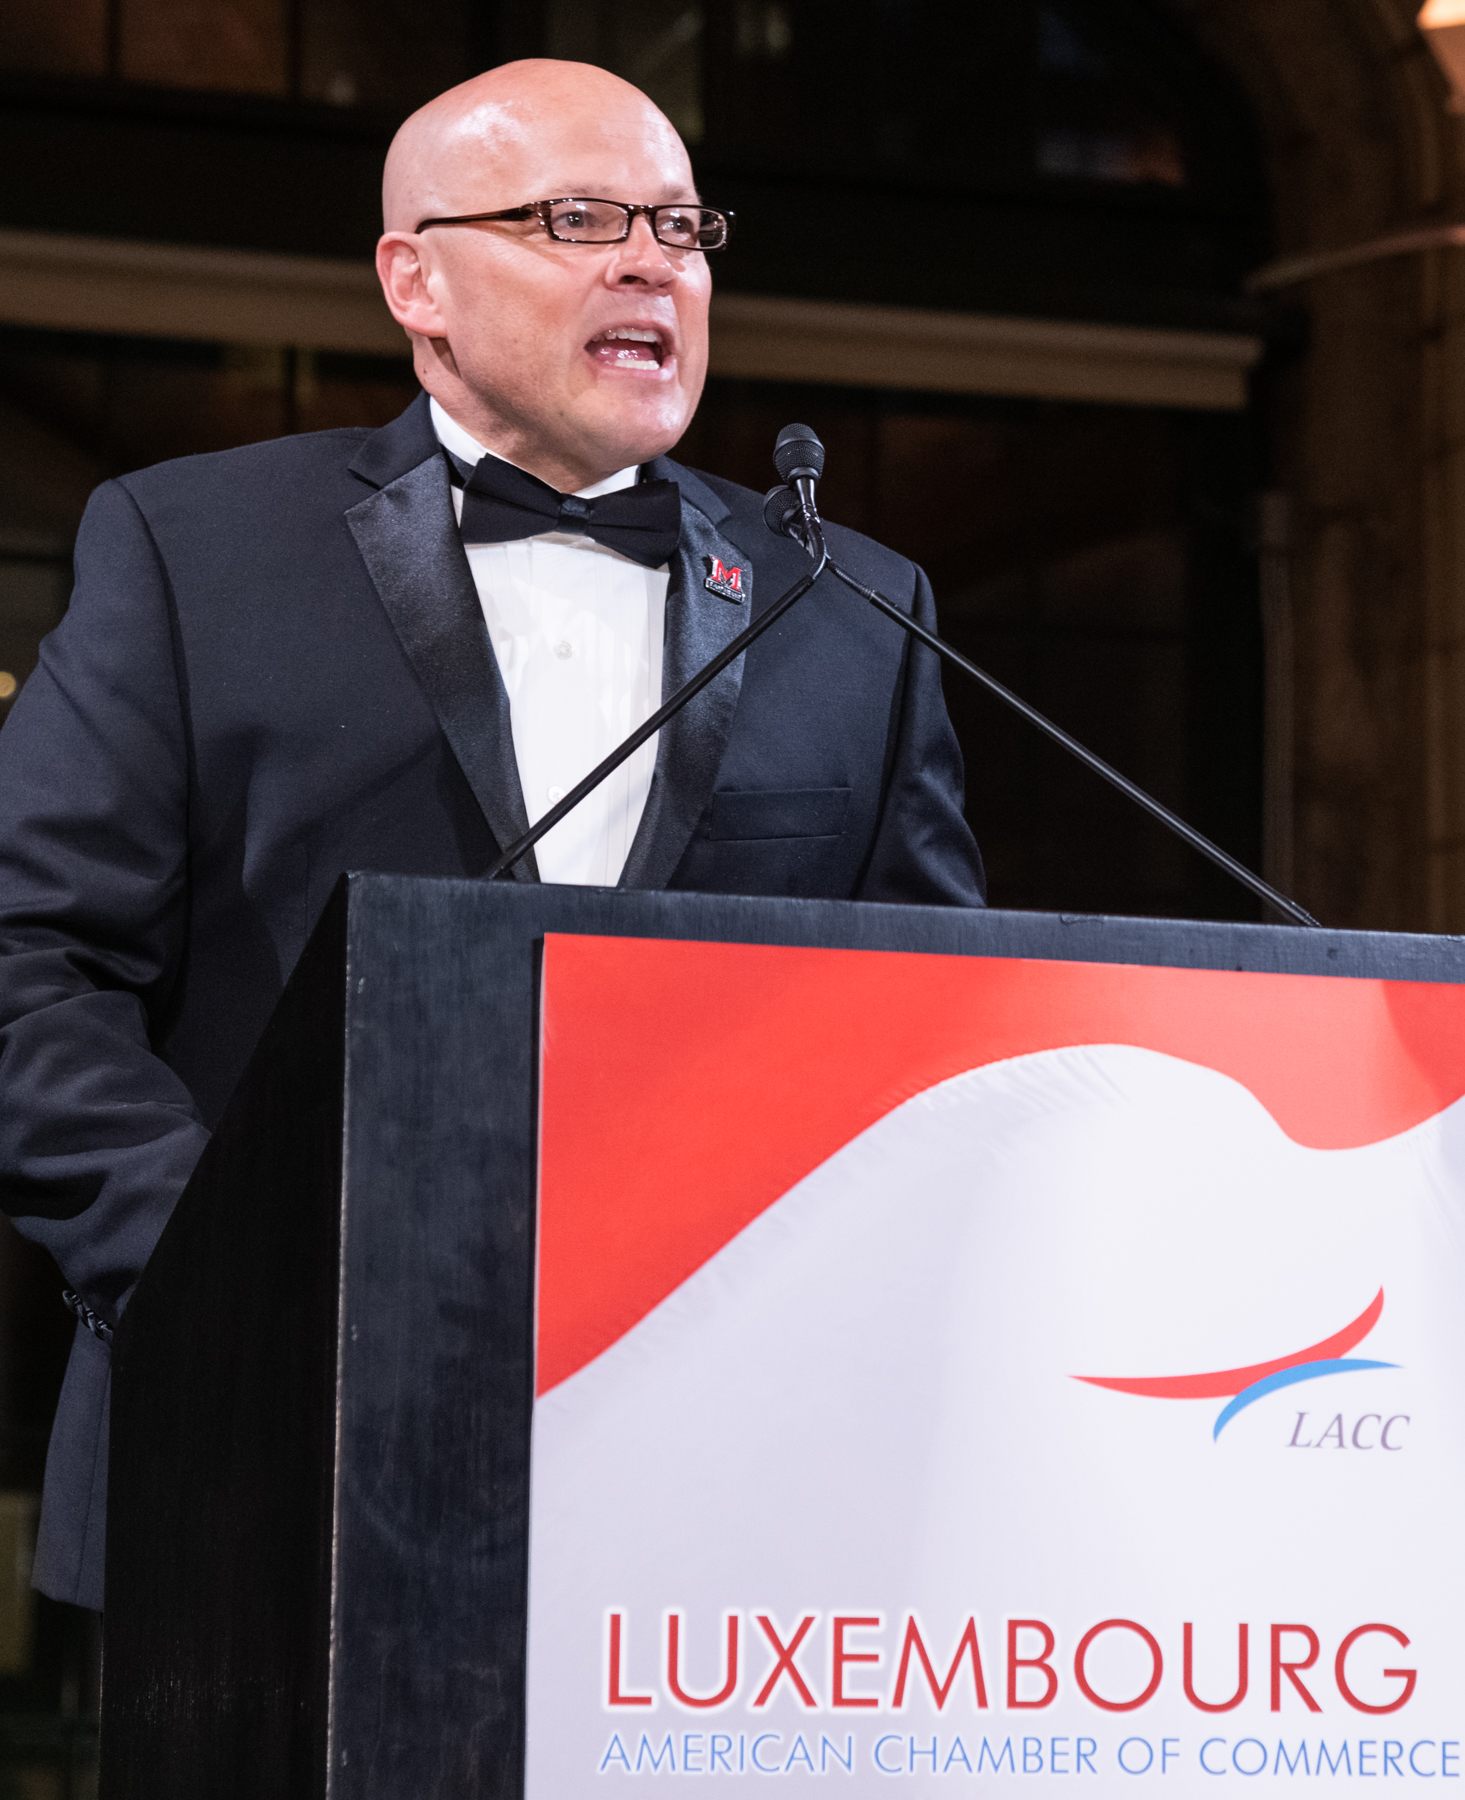 2018 Luxembourg American Business Award